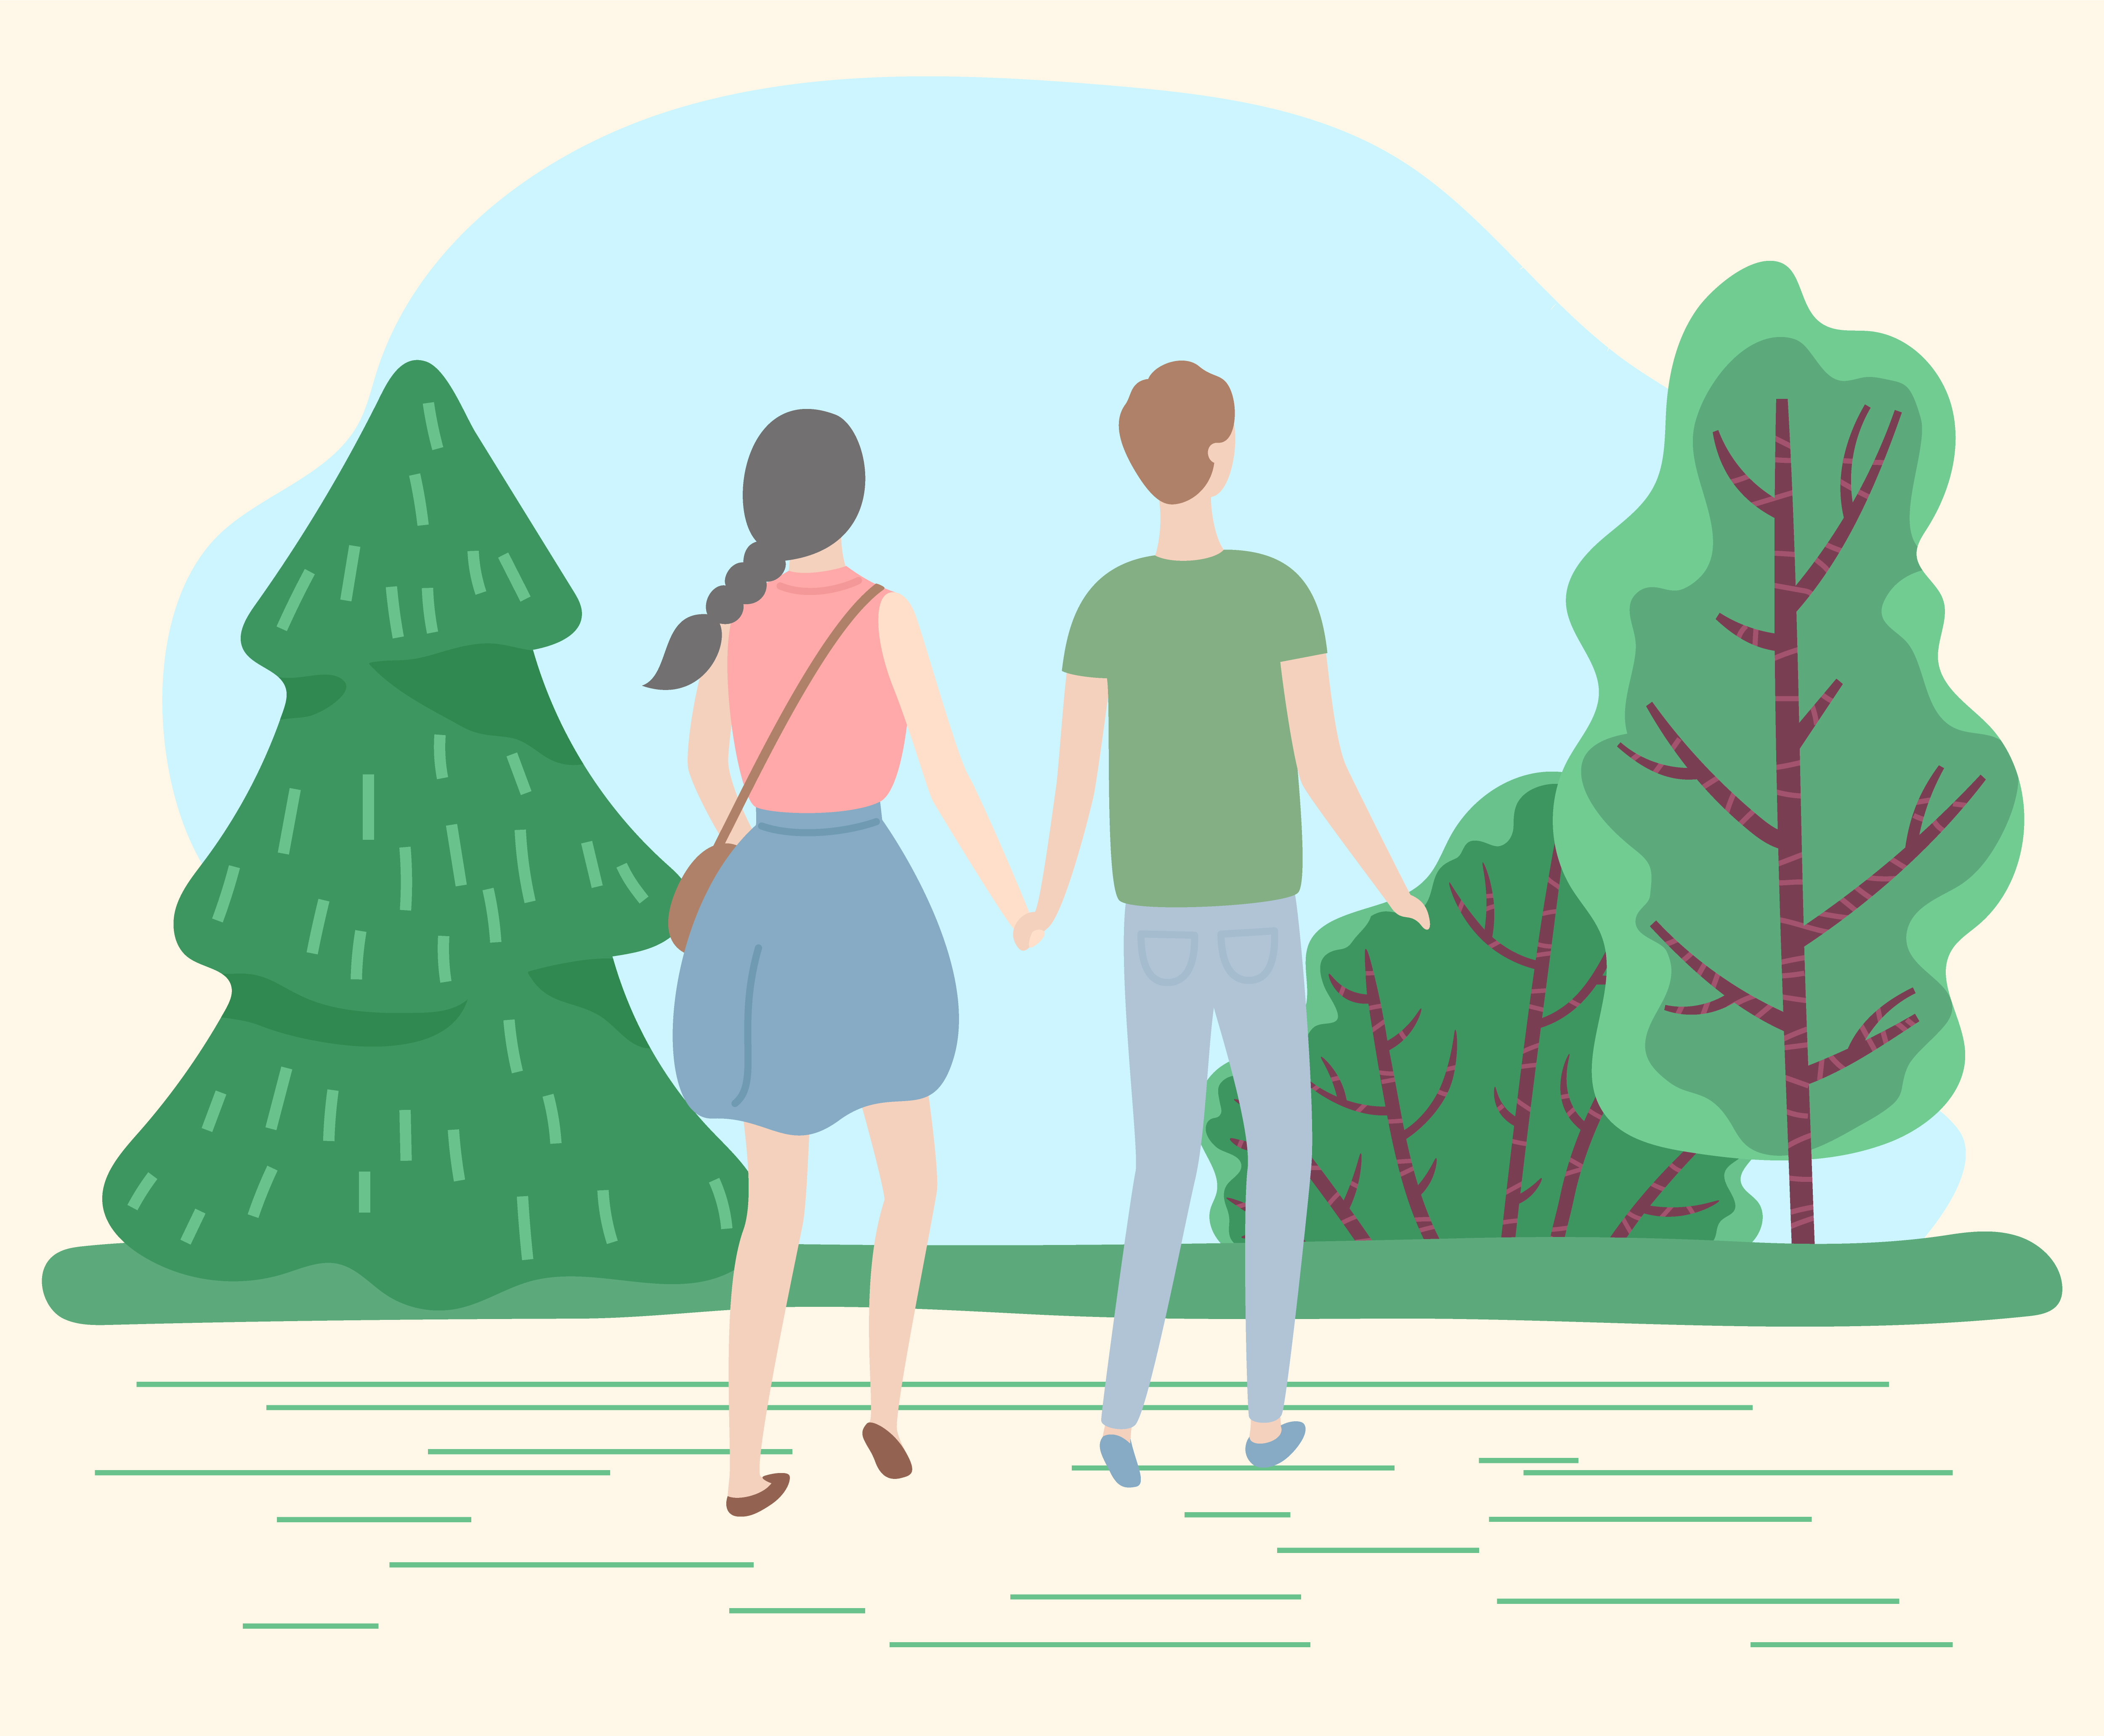 Happy couple on romantic date in park or forest. Man and woman hold each other hands. Summer warm weather, beautiful landscape. Trees with green krone in lawn. Vector illustration in flat style. Couple on Date in Park, Man and Woman Walking